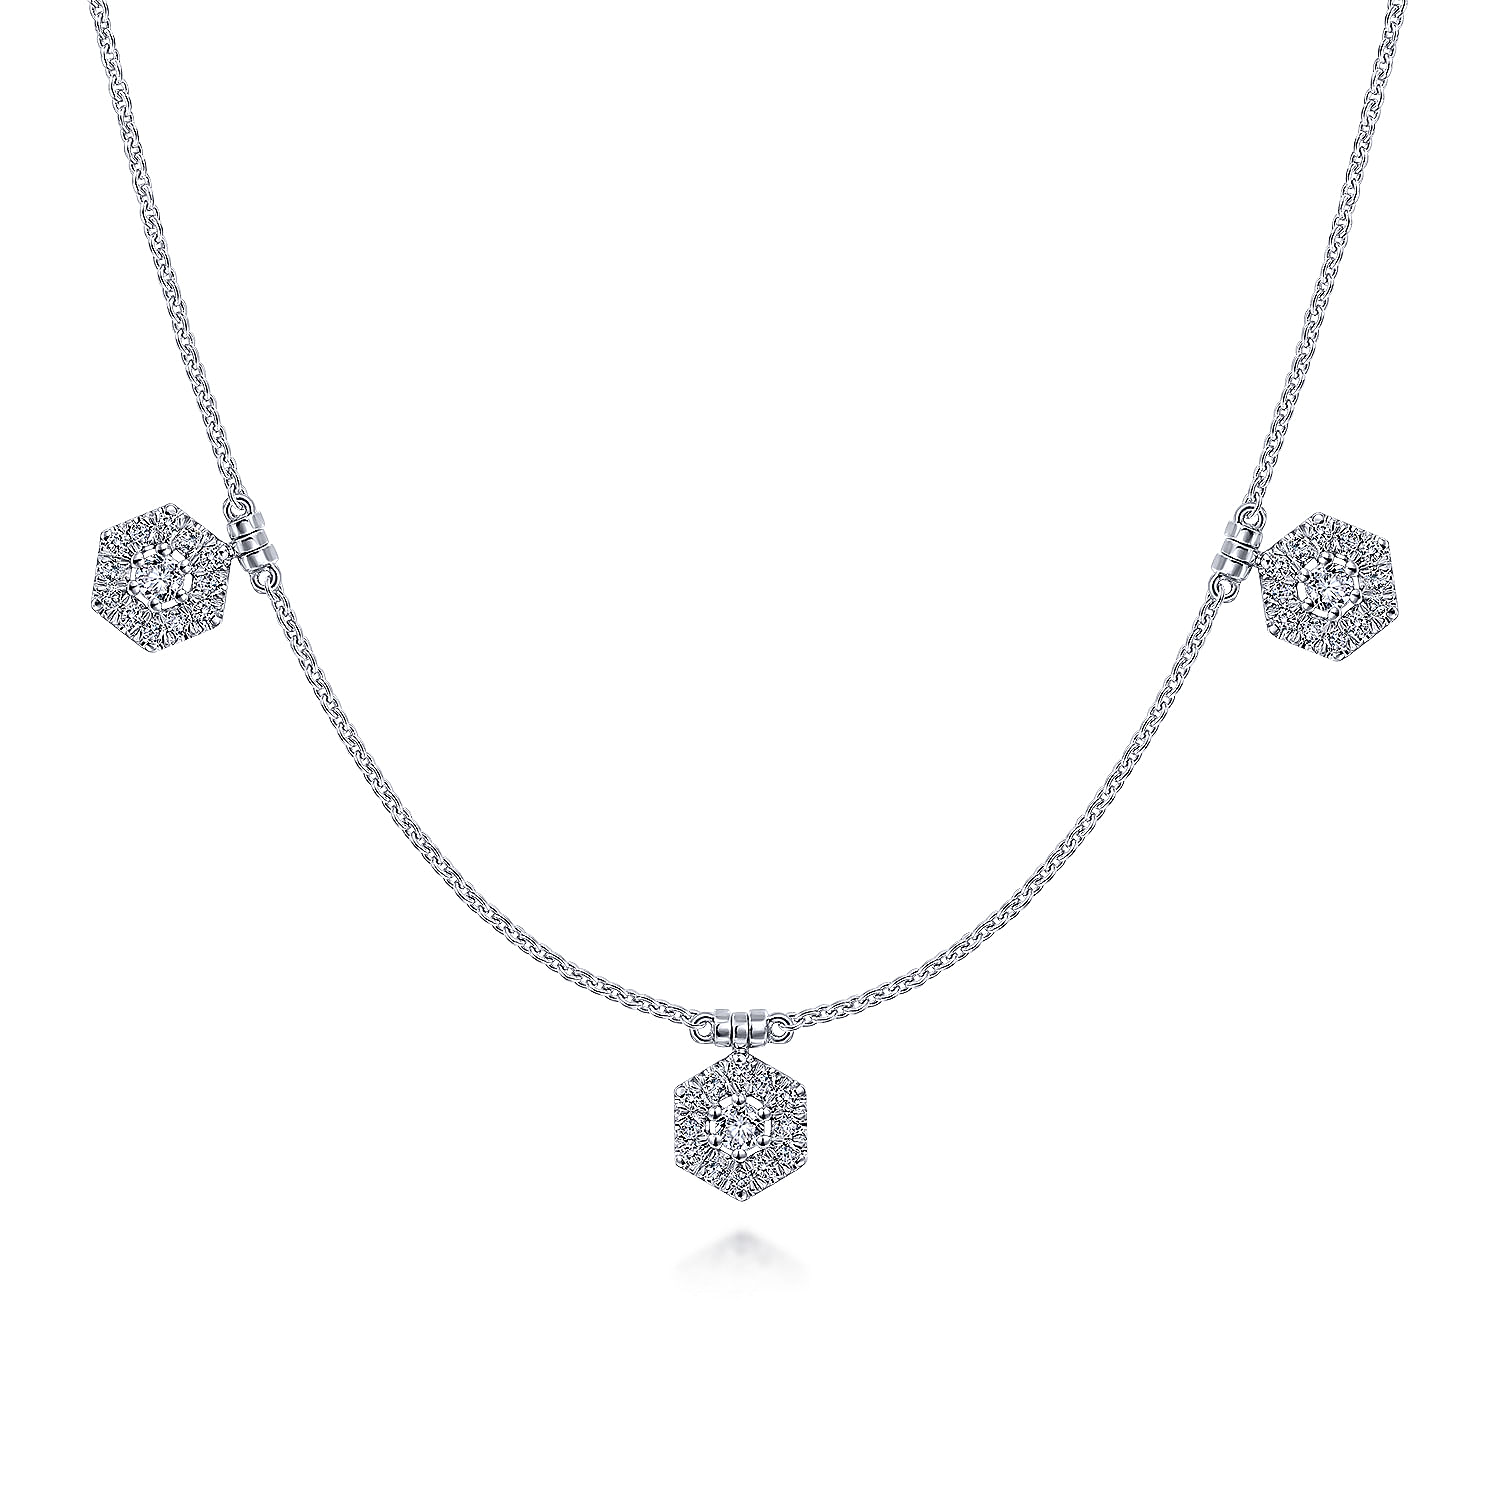 14K White Gold Choker Necklace with Hexagonal Diamond Halo Stations